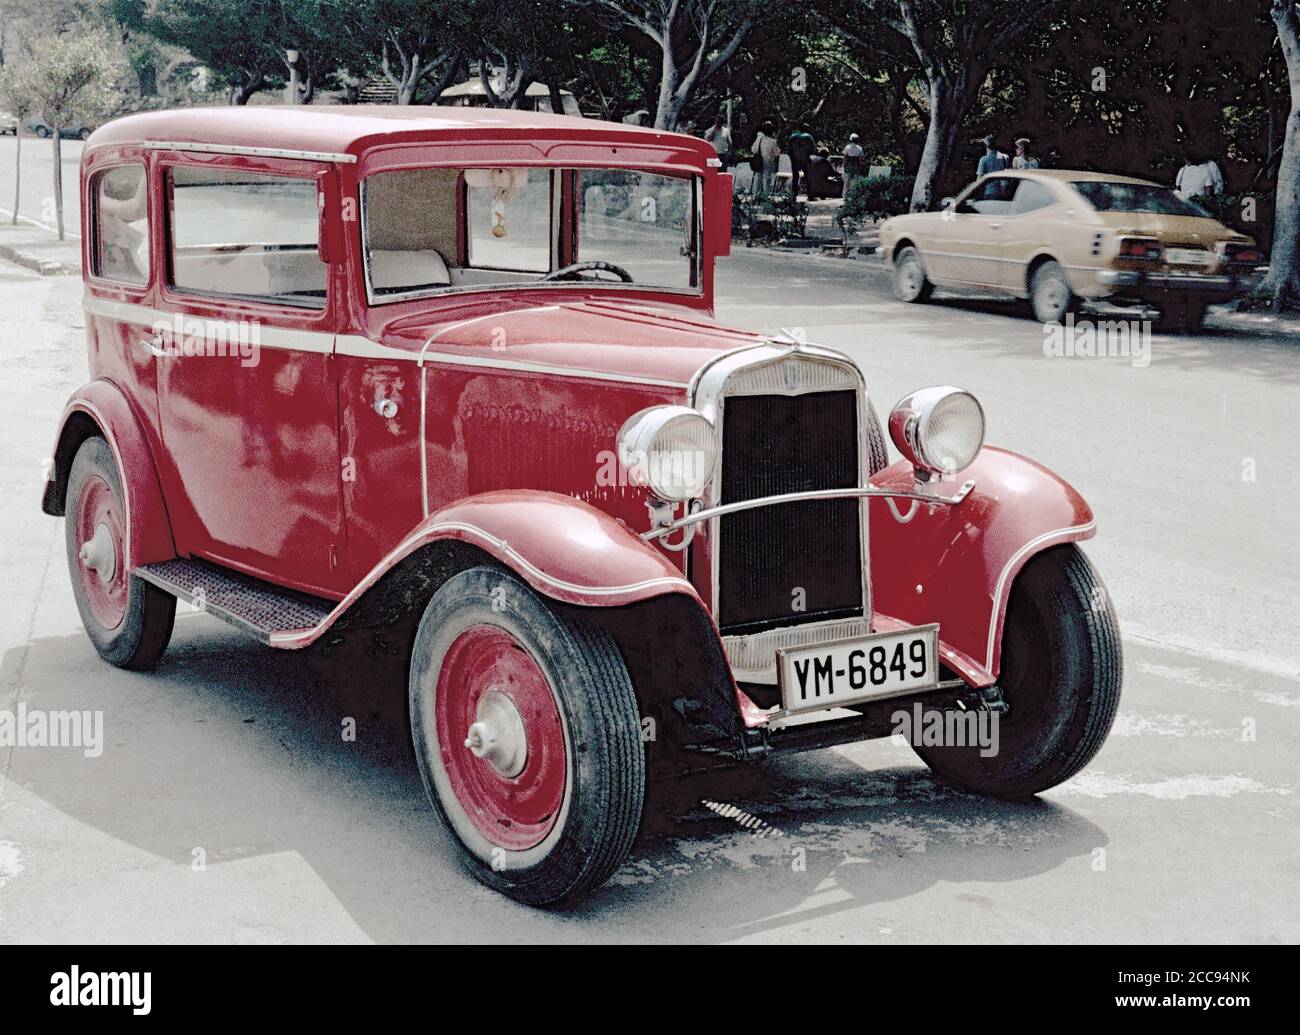 Le compte est bon - Page 20 Rhodes-greece-archival-scanned-photo-of-vintage-red-car-to-transport-the-viewer-back-in-time-2CC94NK